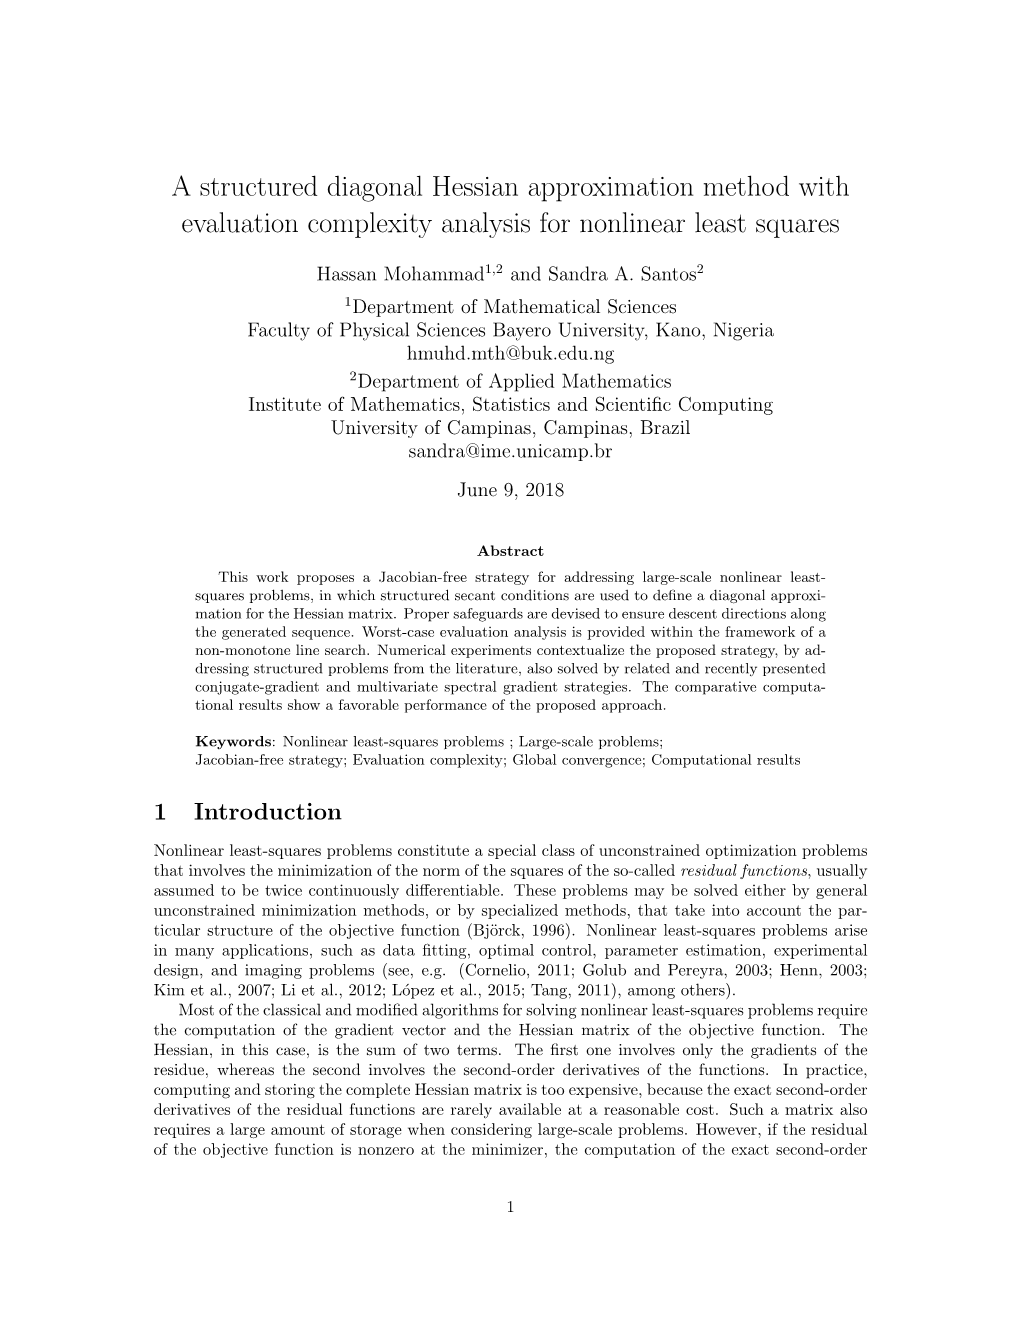 A Structured Diagonal Hessian Approximation Method with Evaluation Complexity Analysis for Nonlinear Least Squares